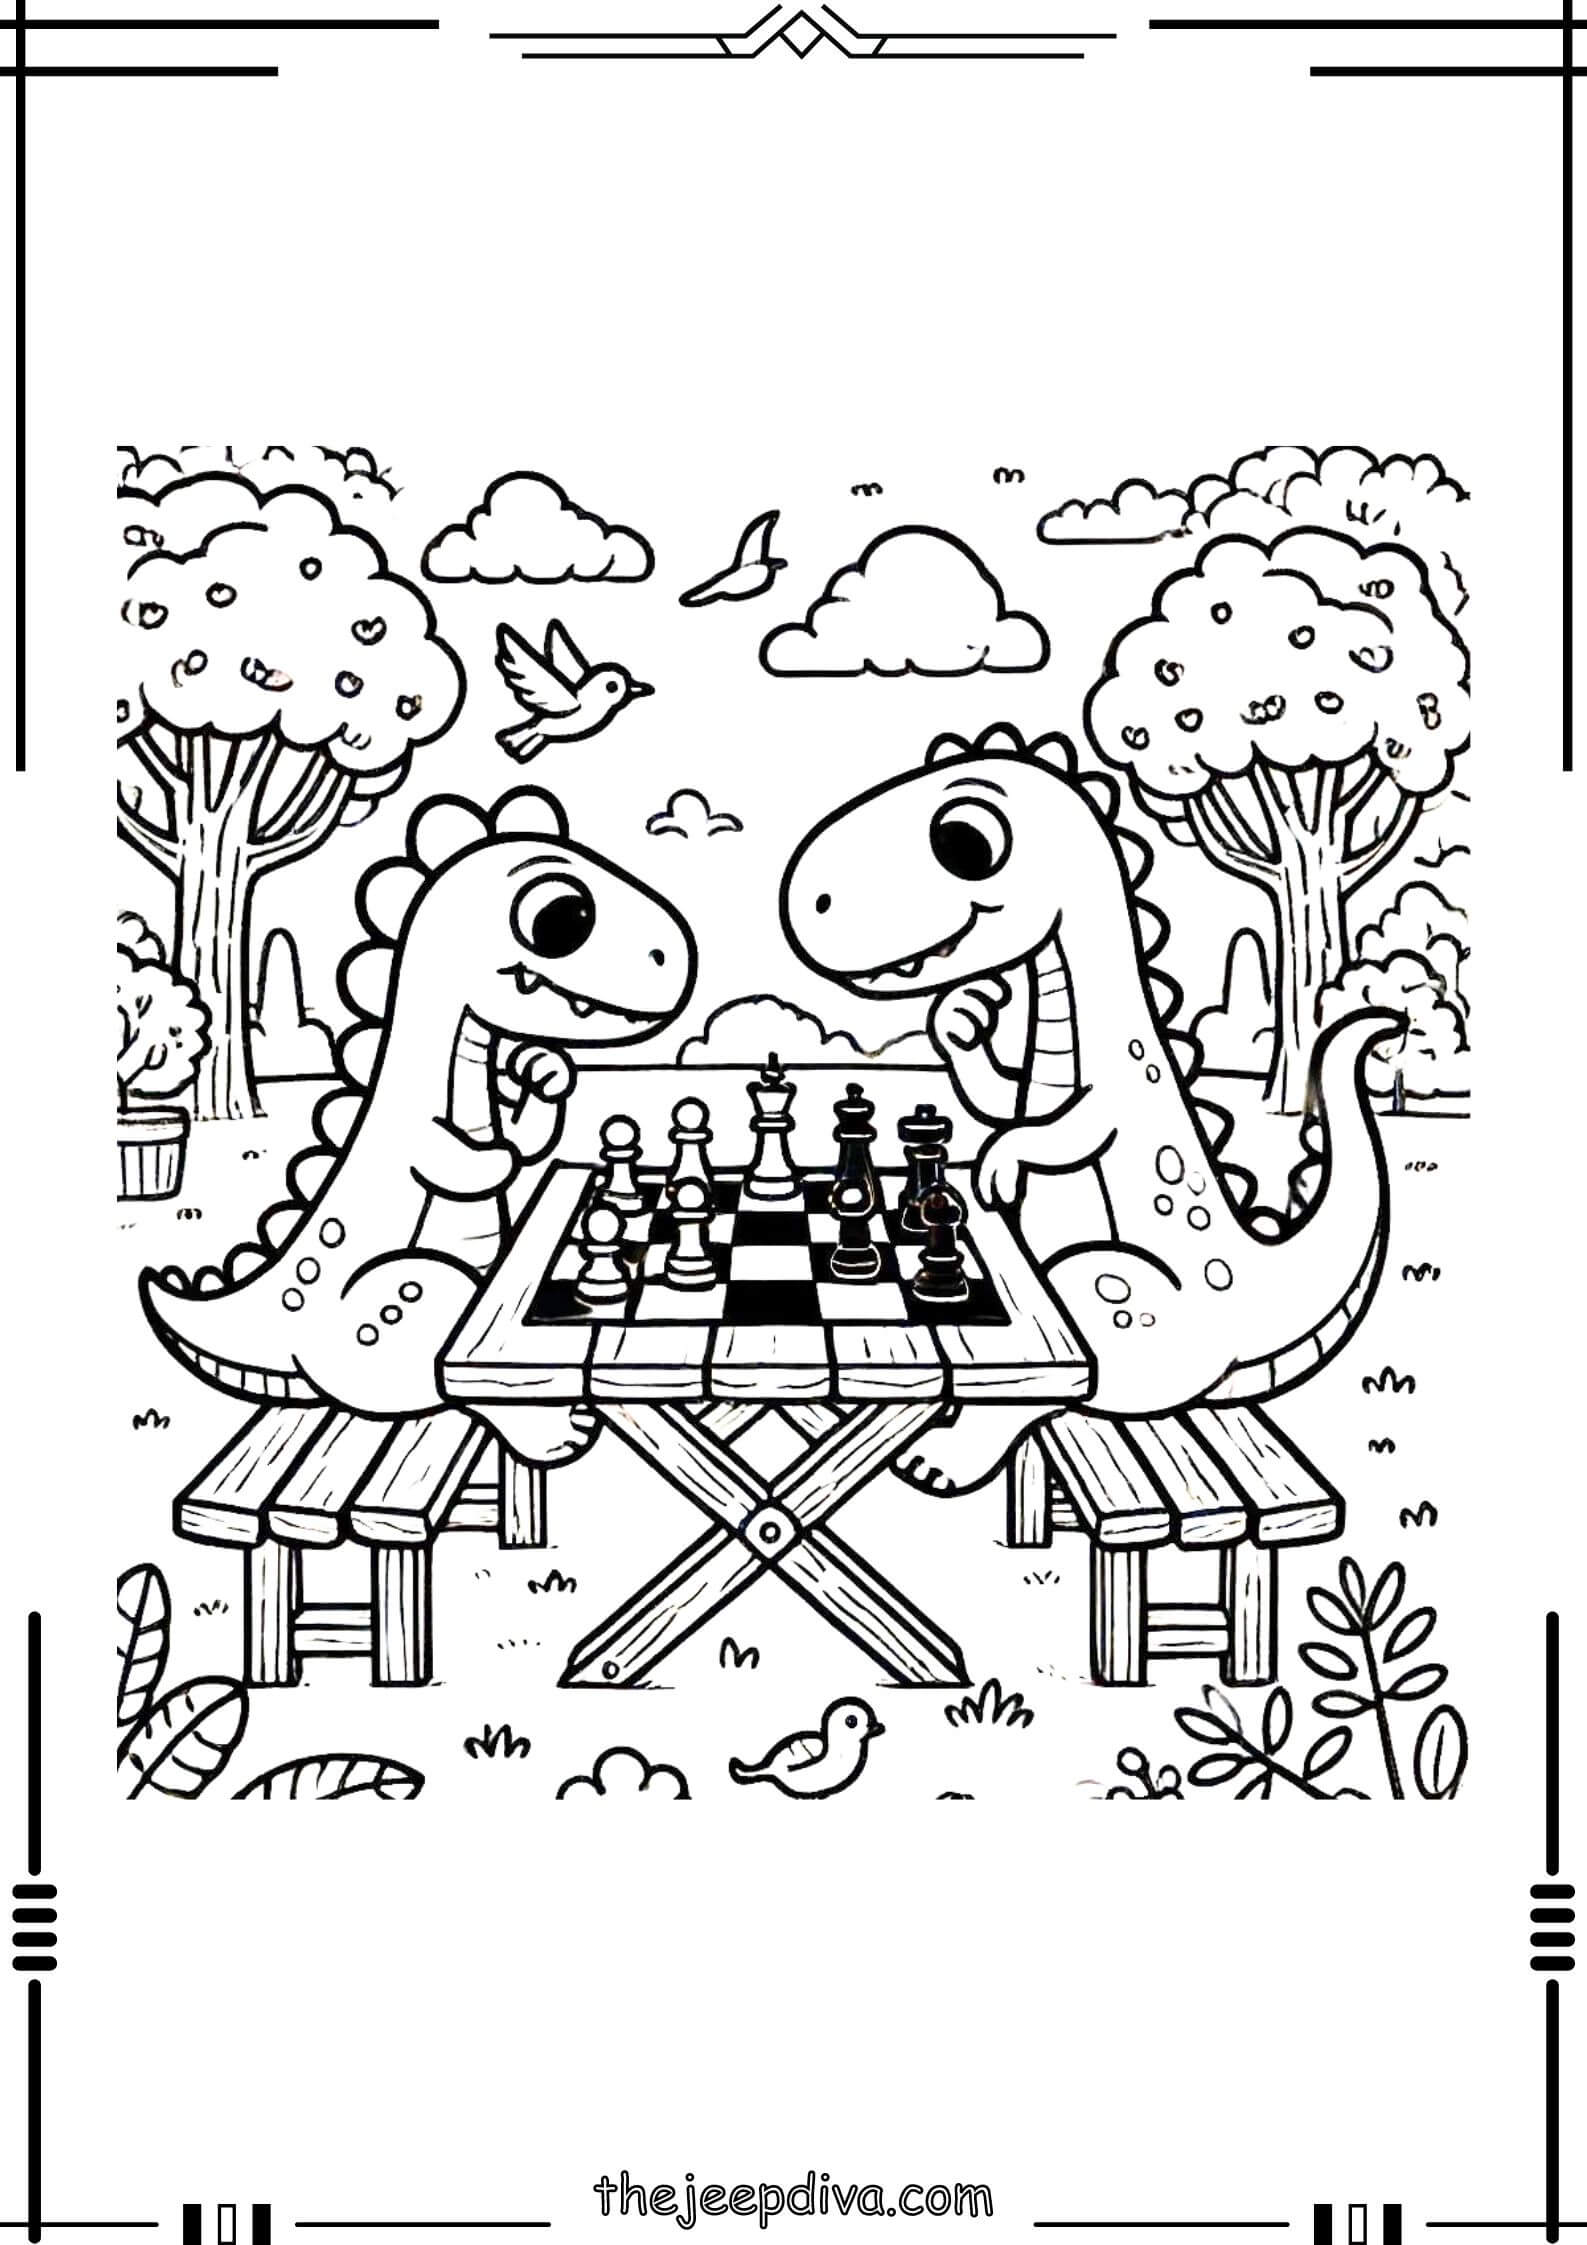 Dinosaur-Colouring-Pages-Hard-15